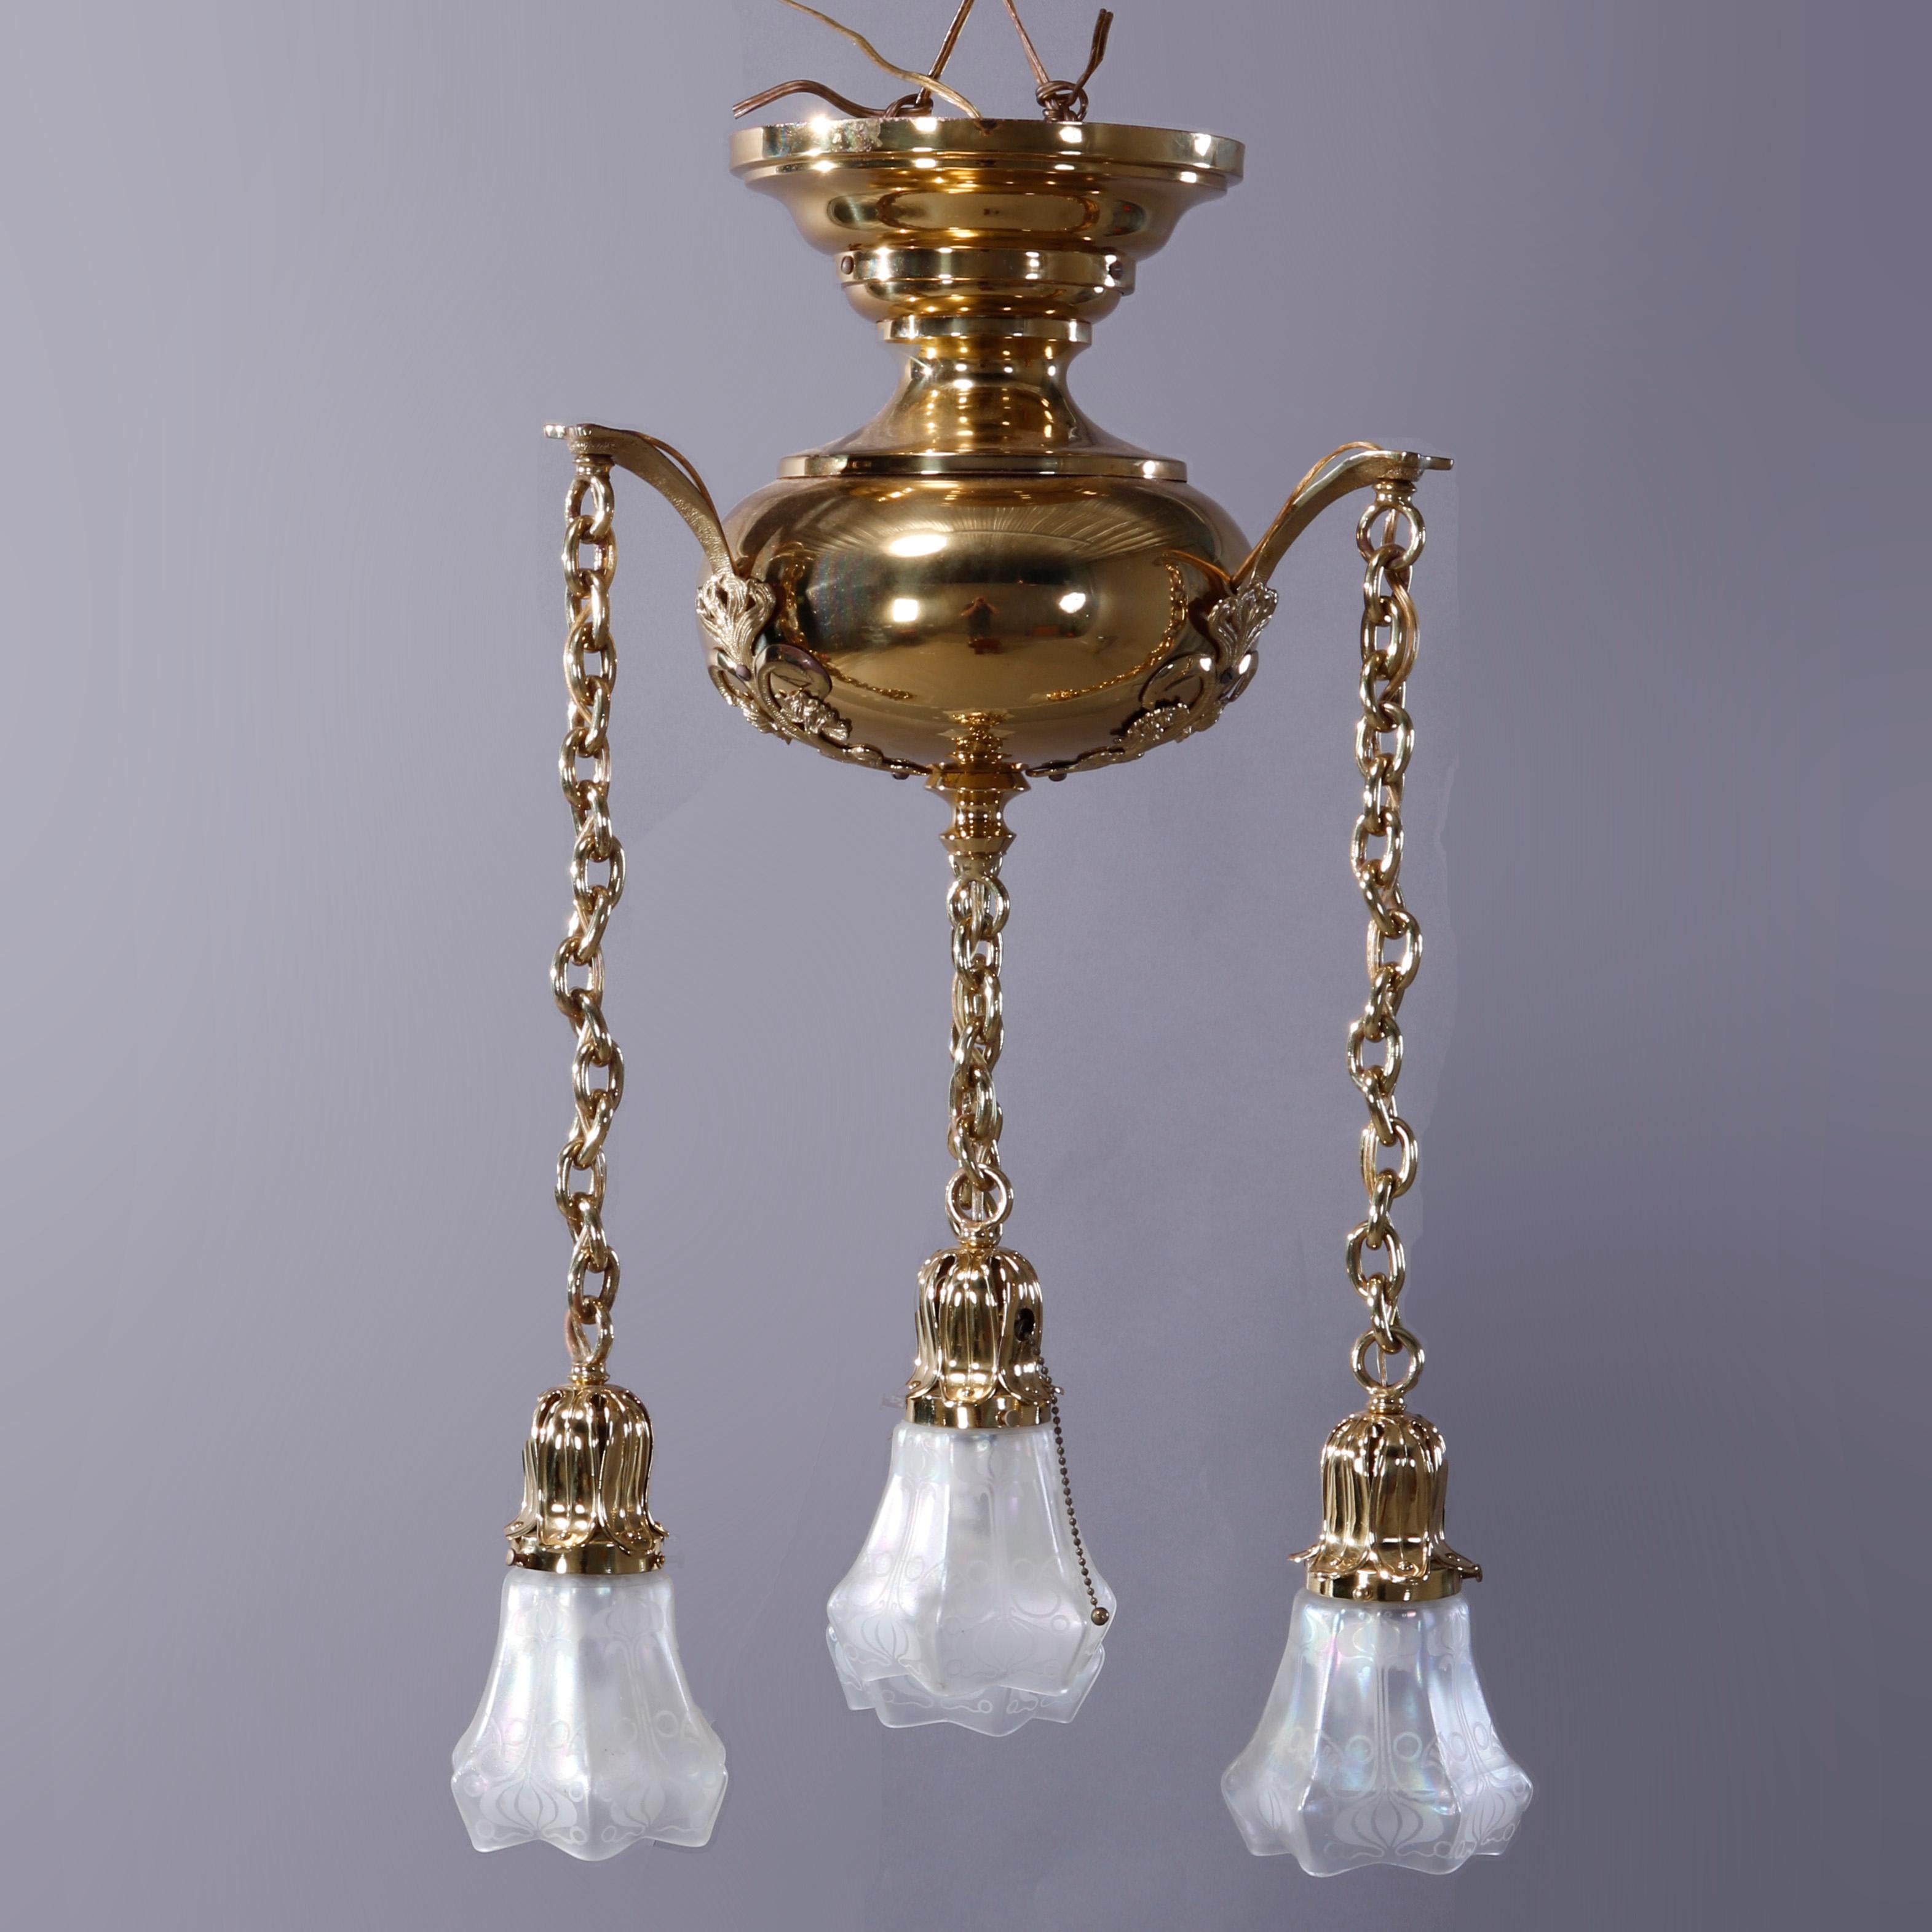 An antique Arts & Crafts ceiling mount hanging light fixture offers brass construction with central globe having scrolled foliate mounts and four drop lights terminating in tulip form glass shades, c1920

Measures - 30''H x 16''W x 16''D.
   